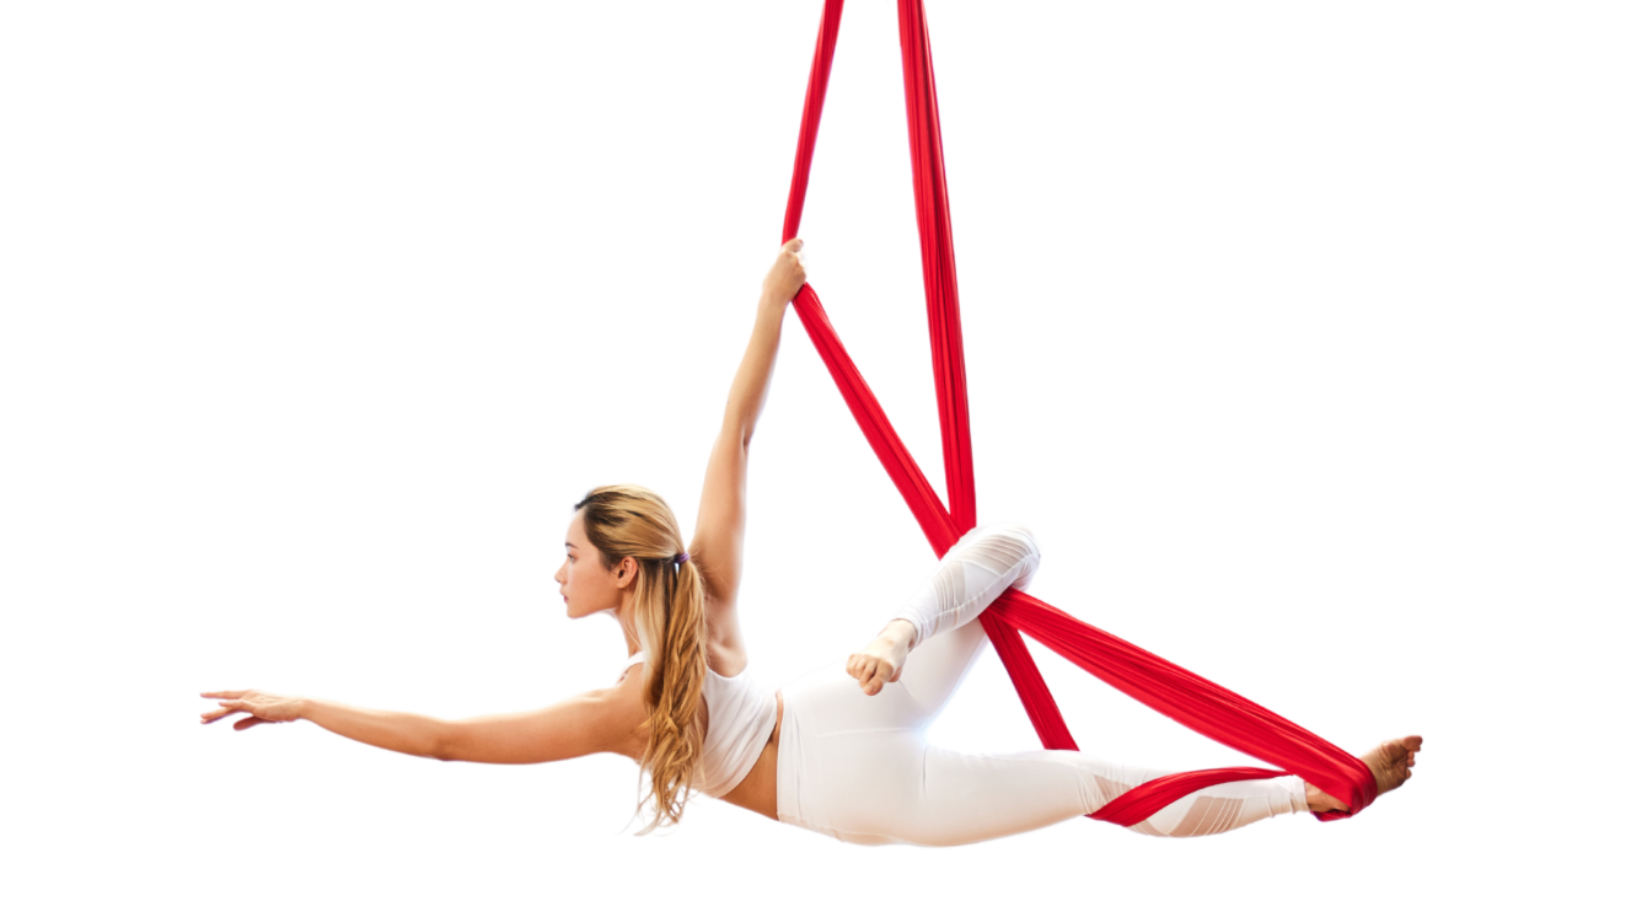 Aerial Yoga - Aerial yoga is a practice that uses a suspended silk hammock to support and enhance traditional yoga poses, promoting flexibility, strength, and body awareness that incorporate artistic elements. - Available everyday in FITsy Studios